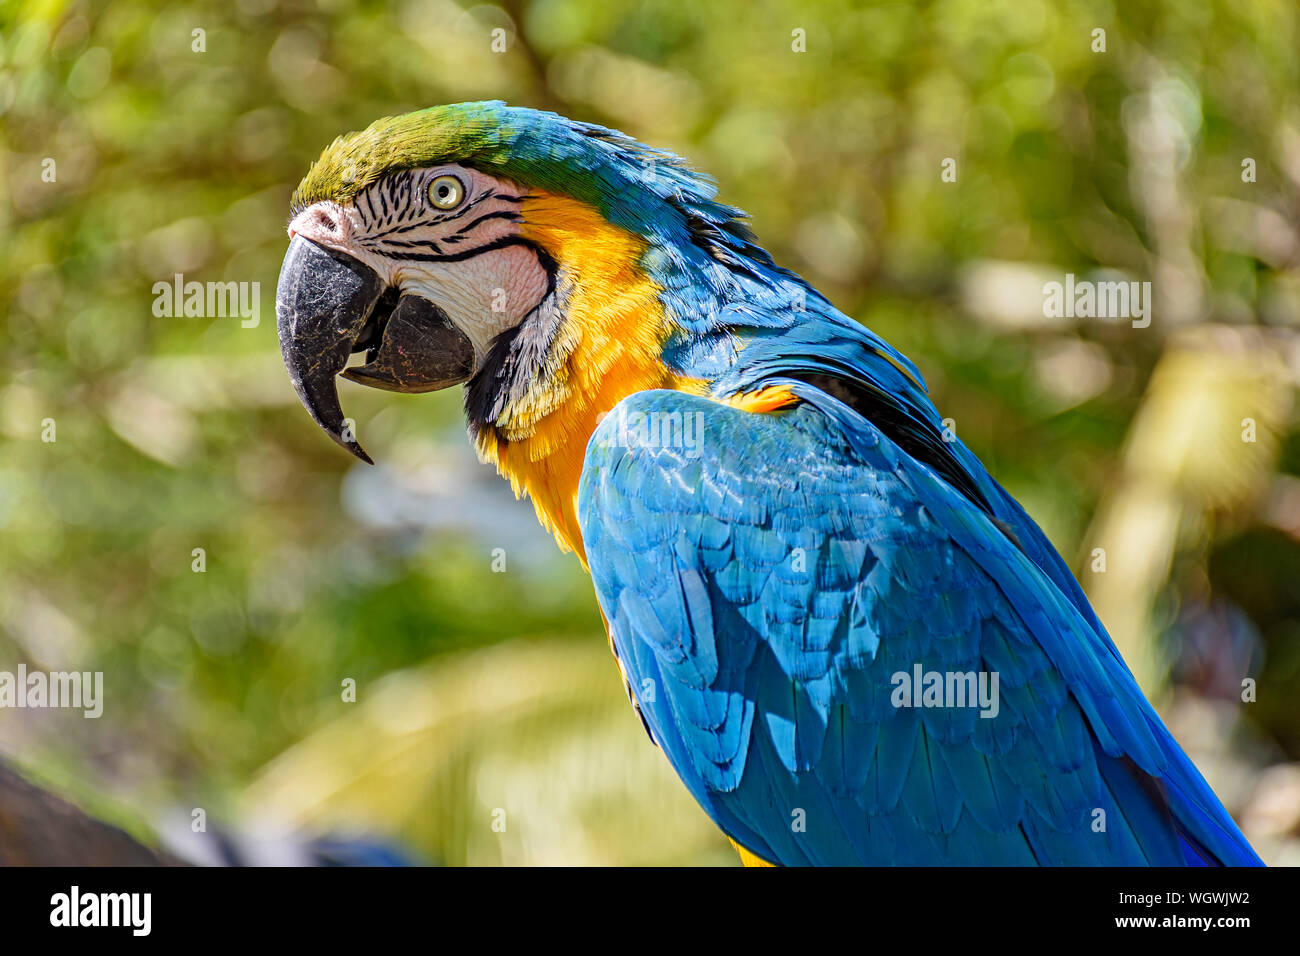 Macaw perched on a branch with vegetation of the Brazilian rainforest behind Stock Photo